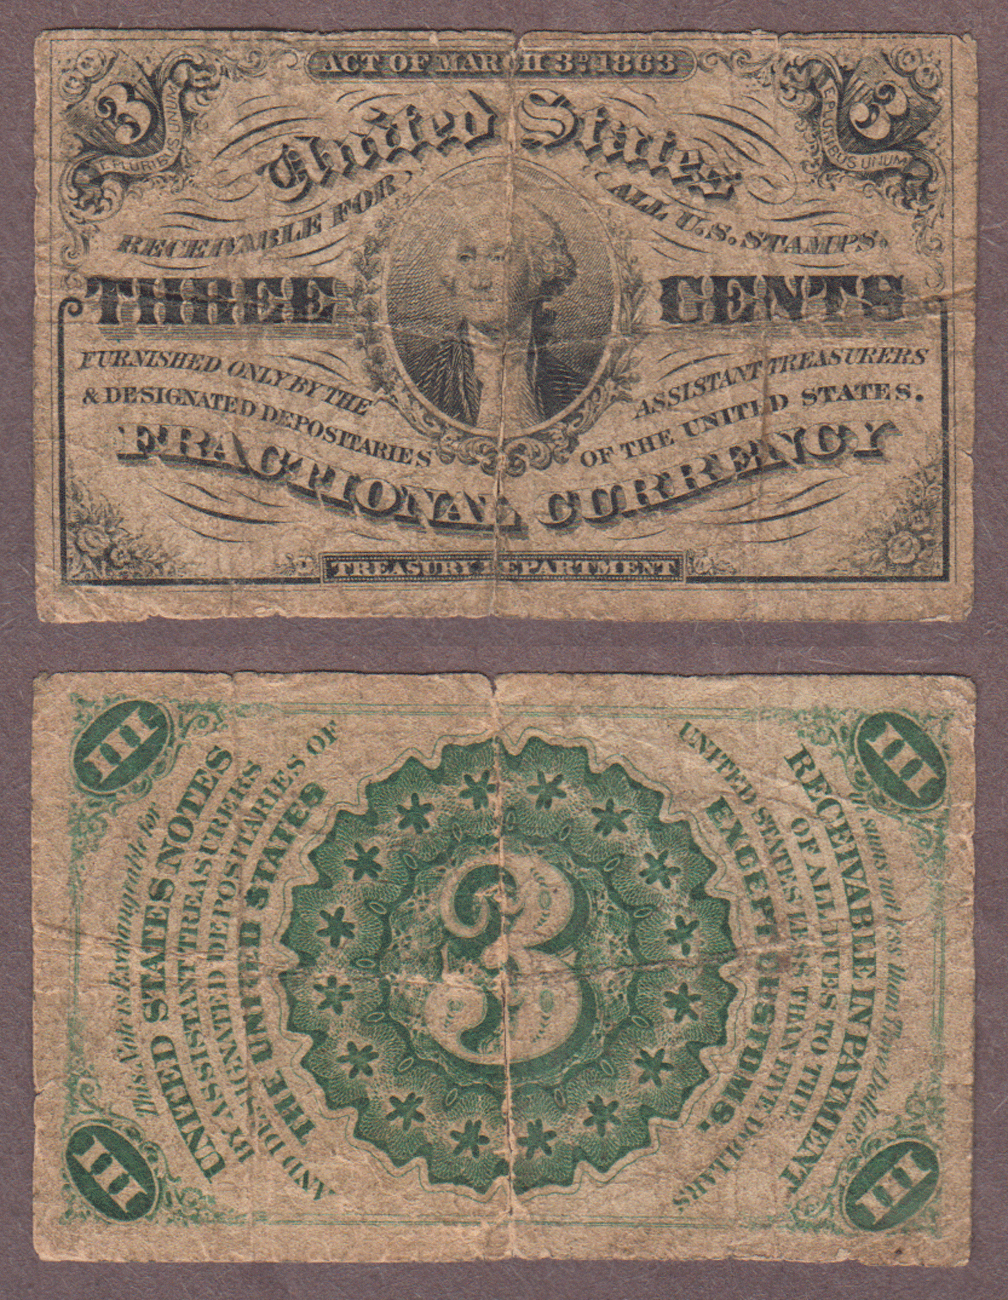 FR-1226 3 Cent Third Issue US Fractional currency